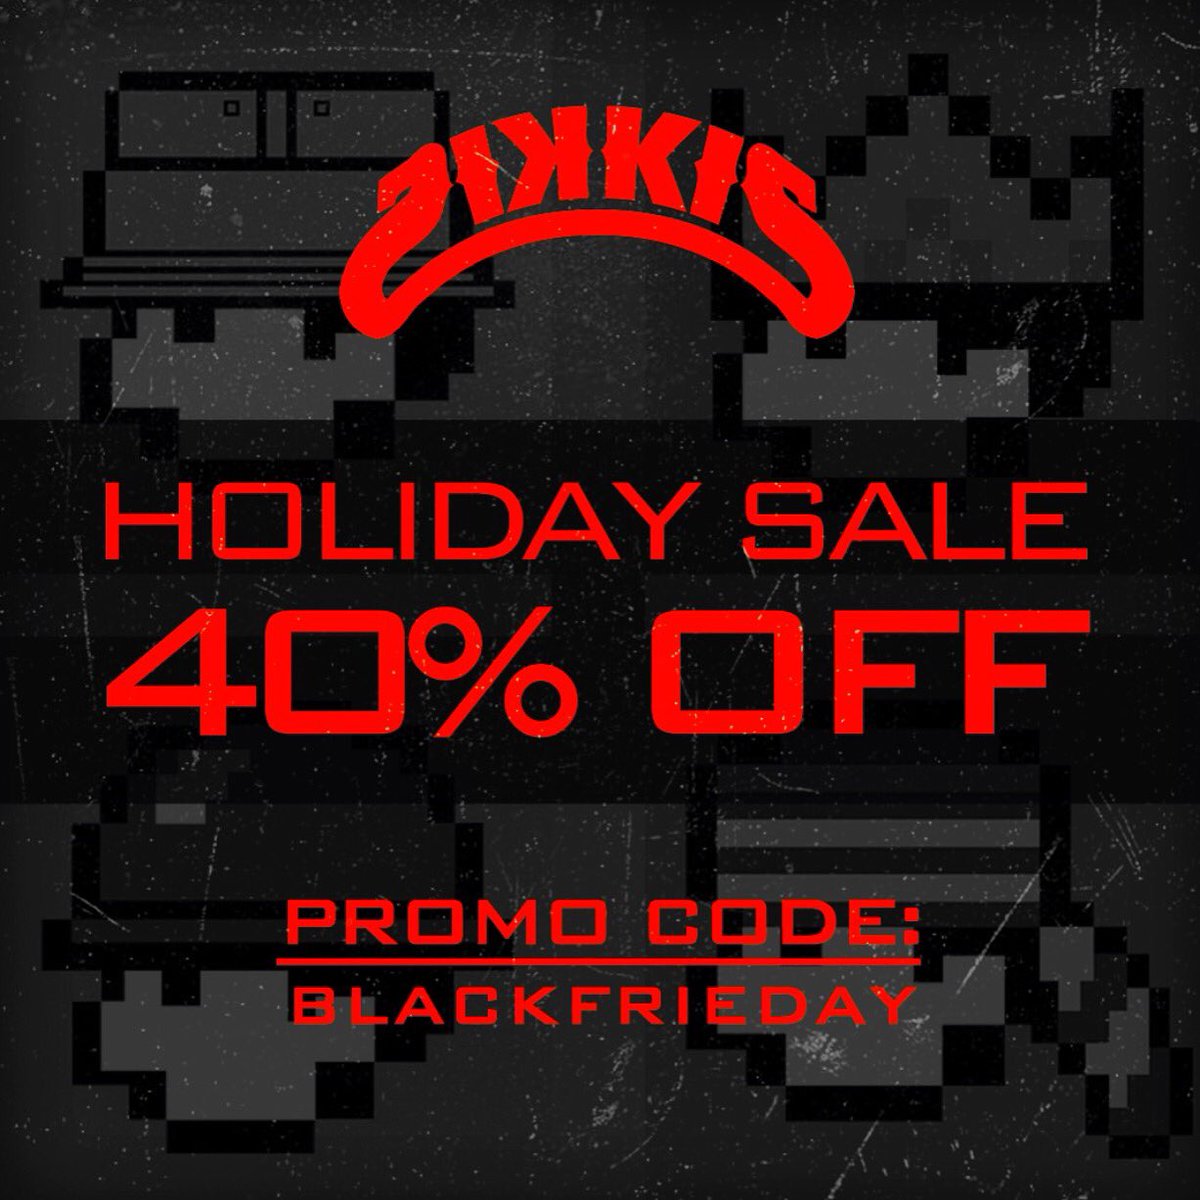 @SIKKISCLOTHING got the holiday sale going on right now 40% OFF the entire website #Sikkisusa